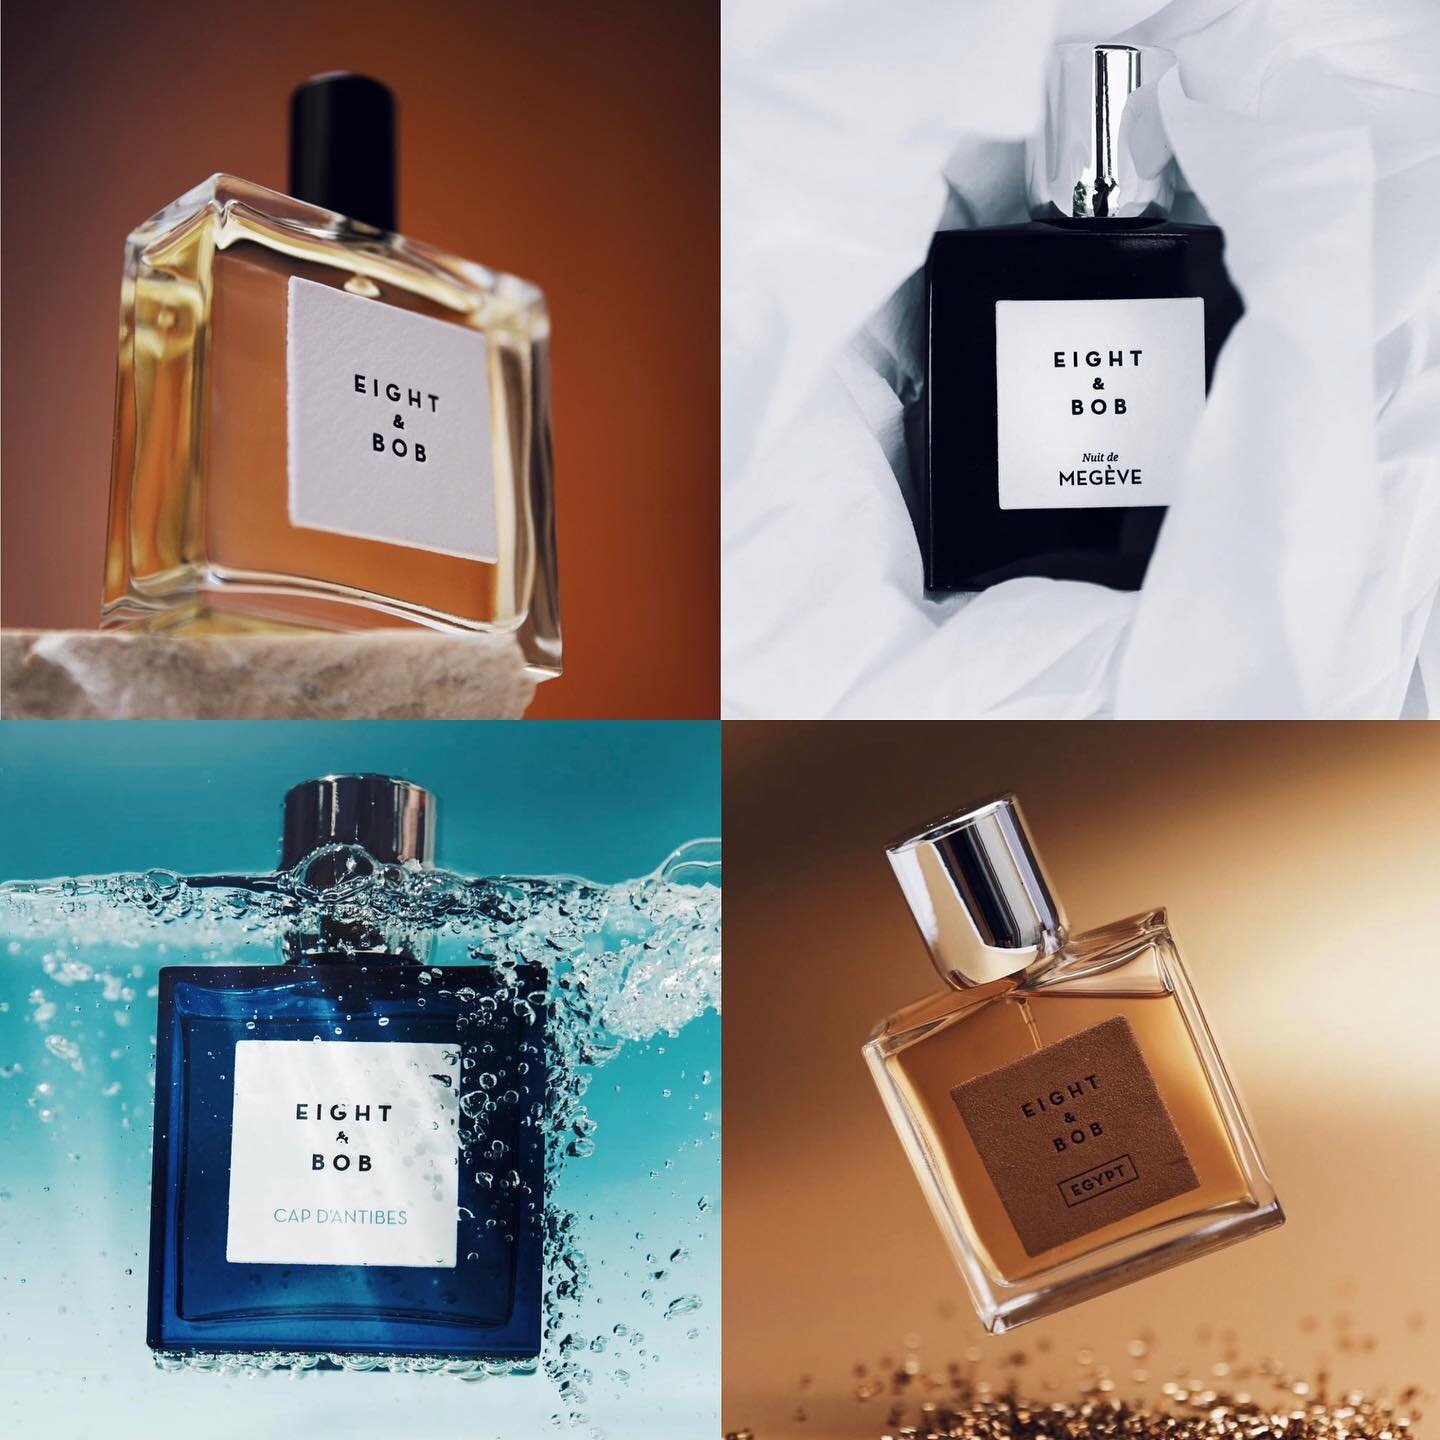 Everyone&rsquo;s favorite Eight &amp; Bob is restocked and ready to take your senses to the French Riviera #cologne #johnnieq #eightandbob #frenchriviera #egypt #megeve #capdantibes #jfk @eightandbob_